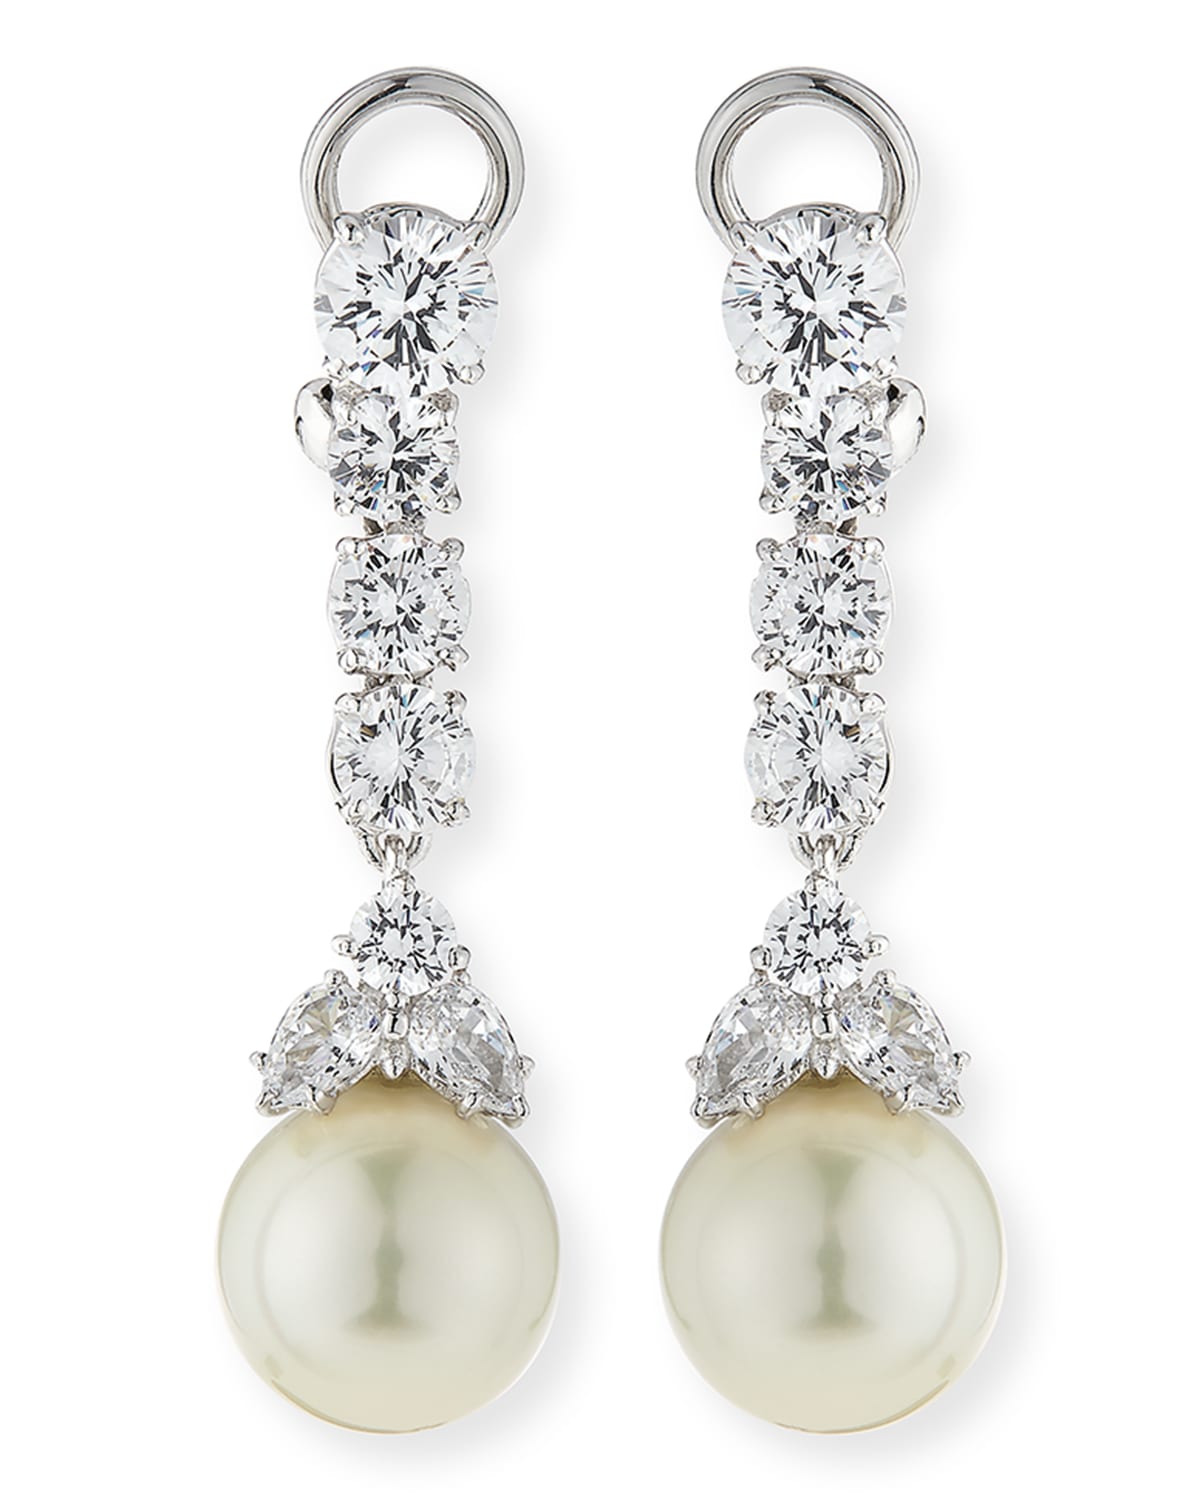 Fantasia by DeSerio 6 TCW CZ & Simulated Pearl Long Drop Earrings